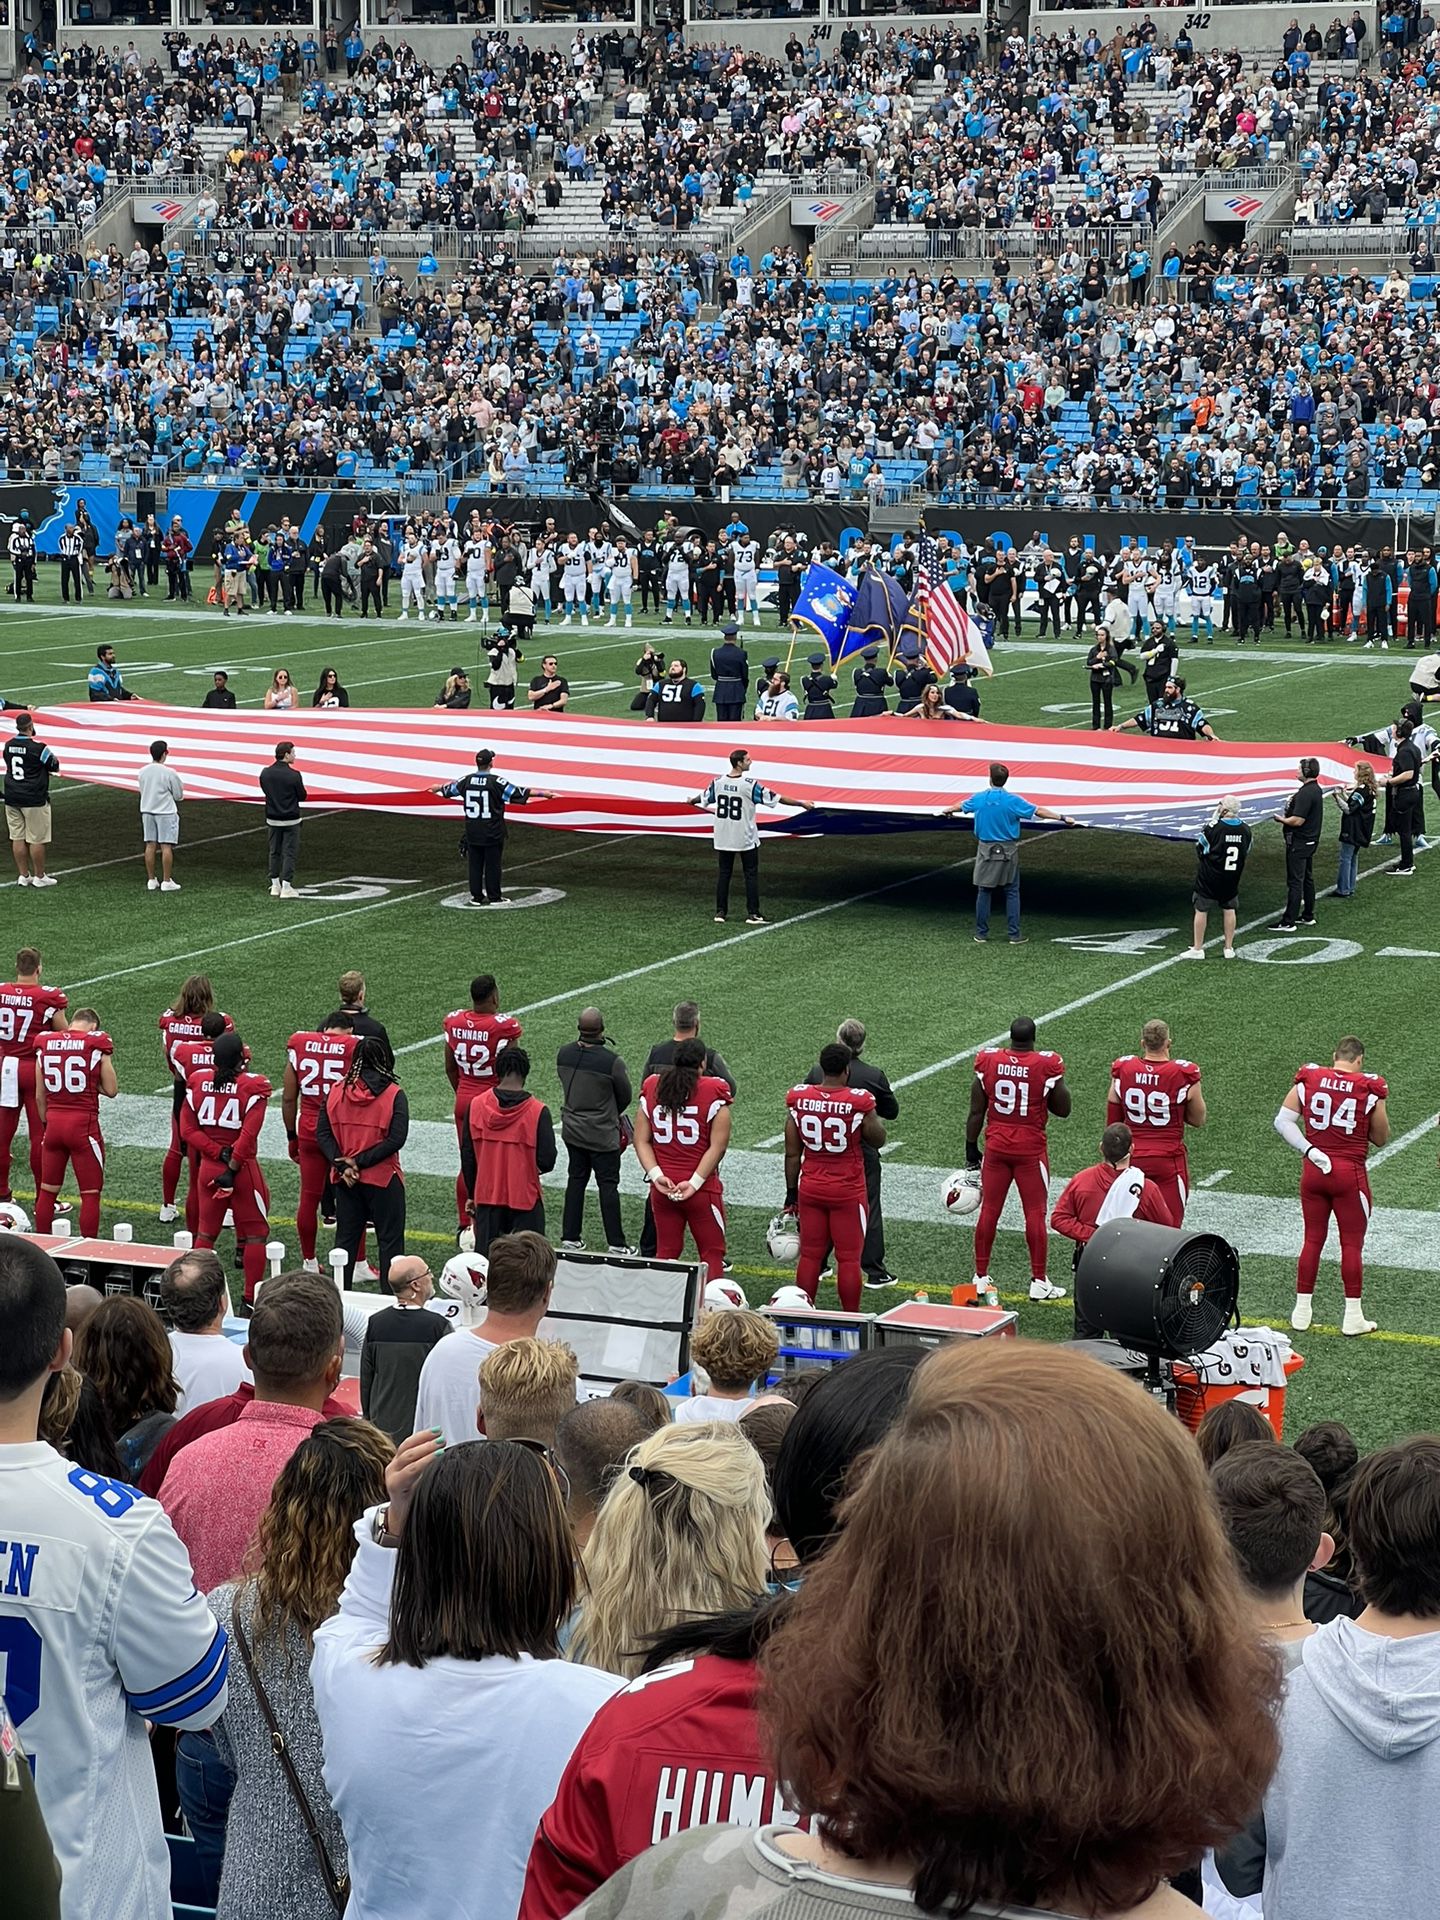 2 Lower level TNF Premium Section 110 Tickets panthers Vs Falcons 